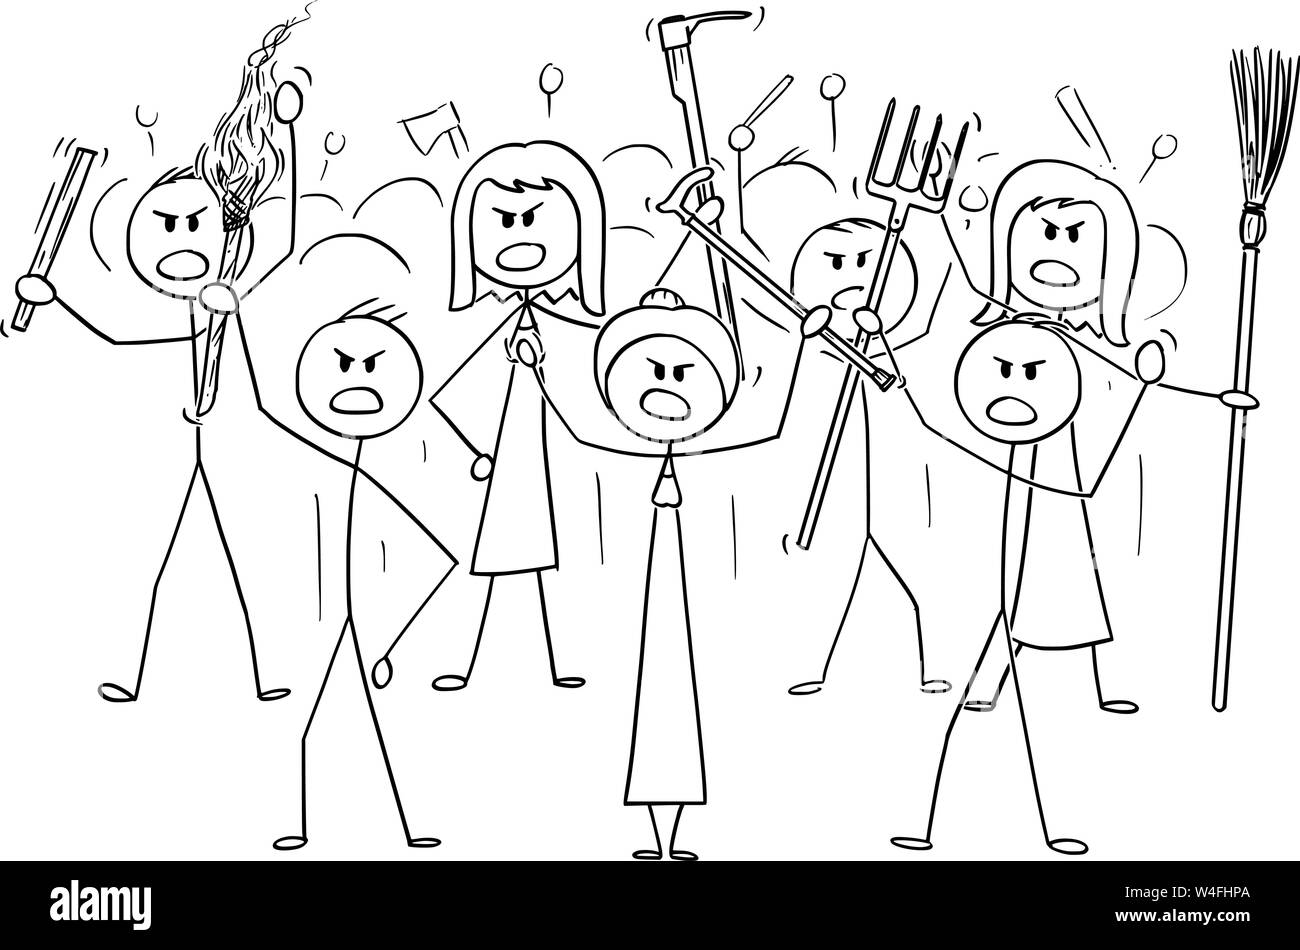 Vector cartoon stick figure drawing conceptual illustration of angry mob characters with torch and tools like pitchfork as weapons. Stock Vector